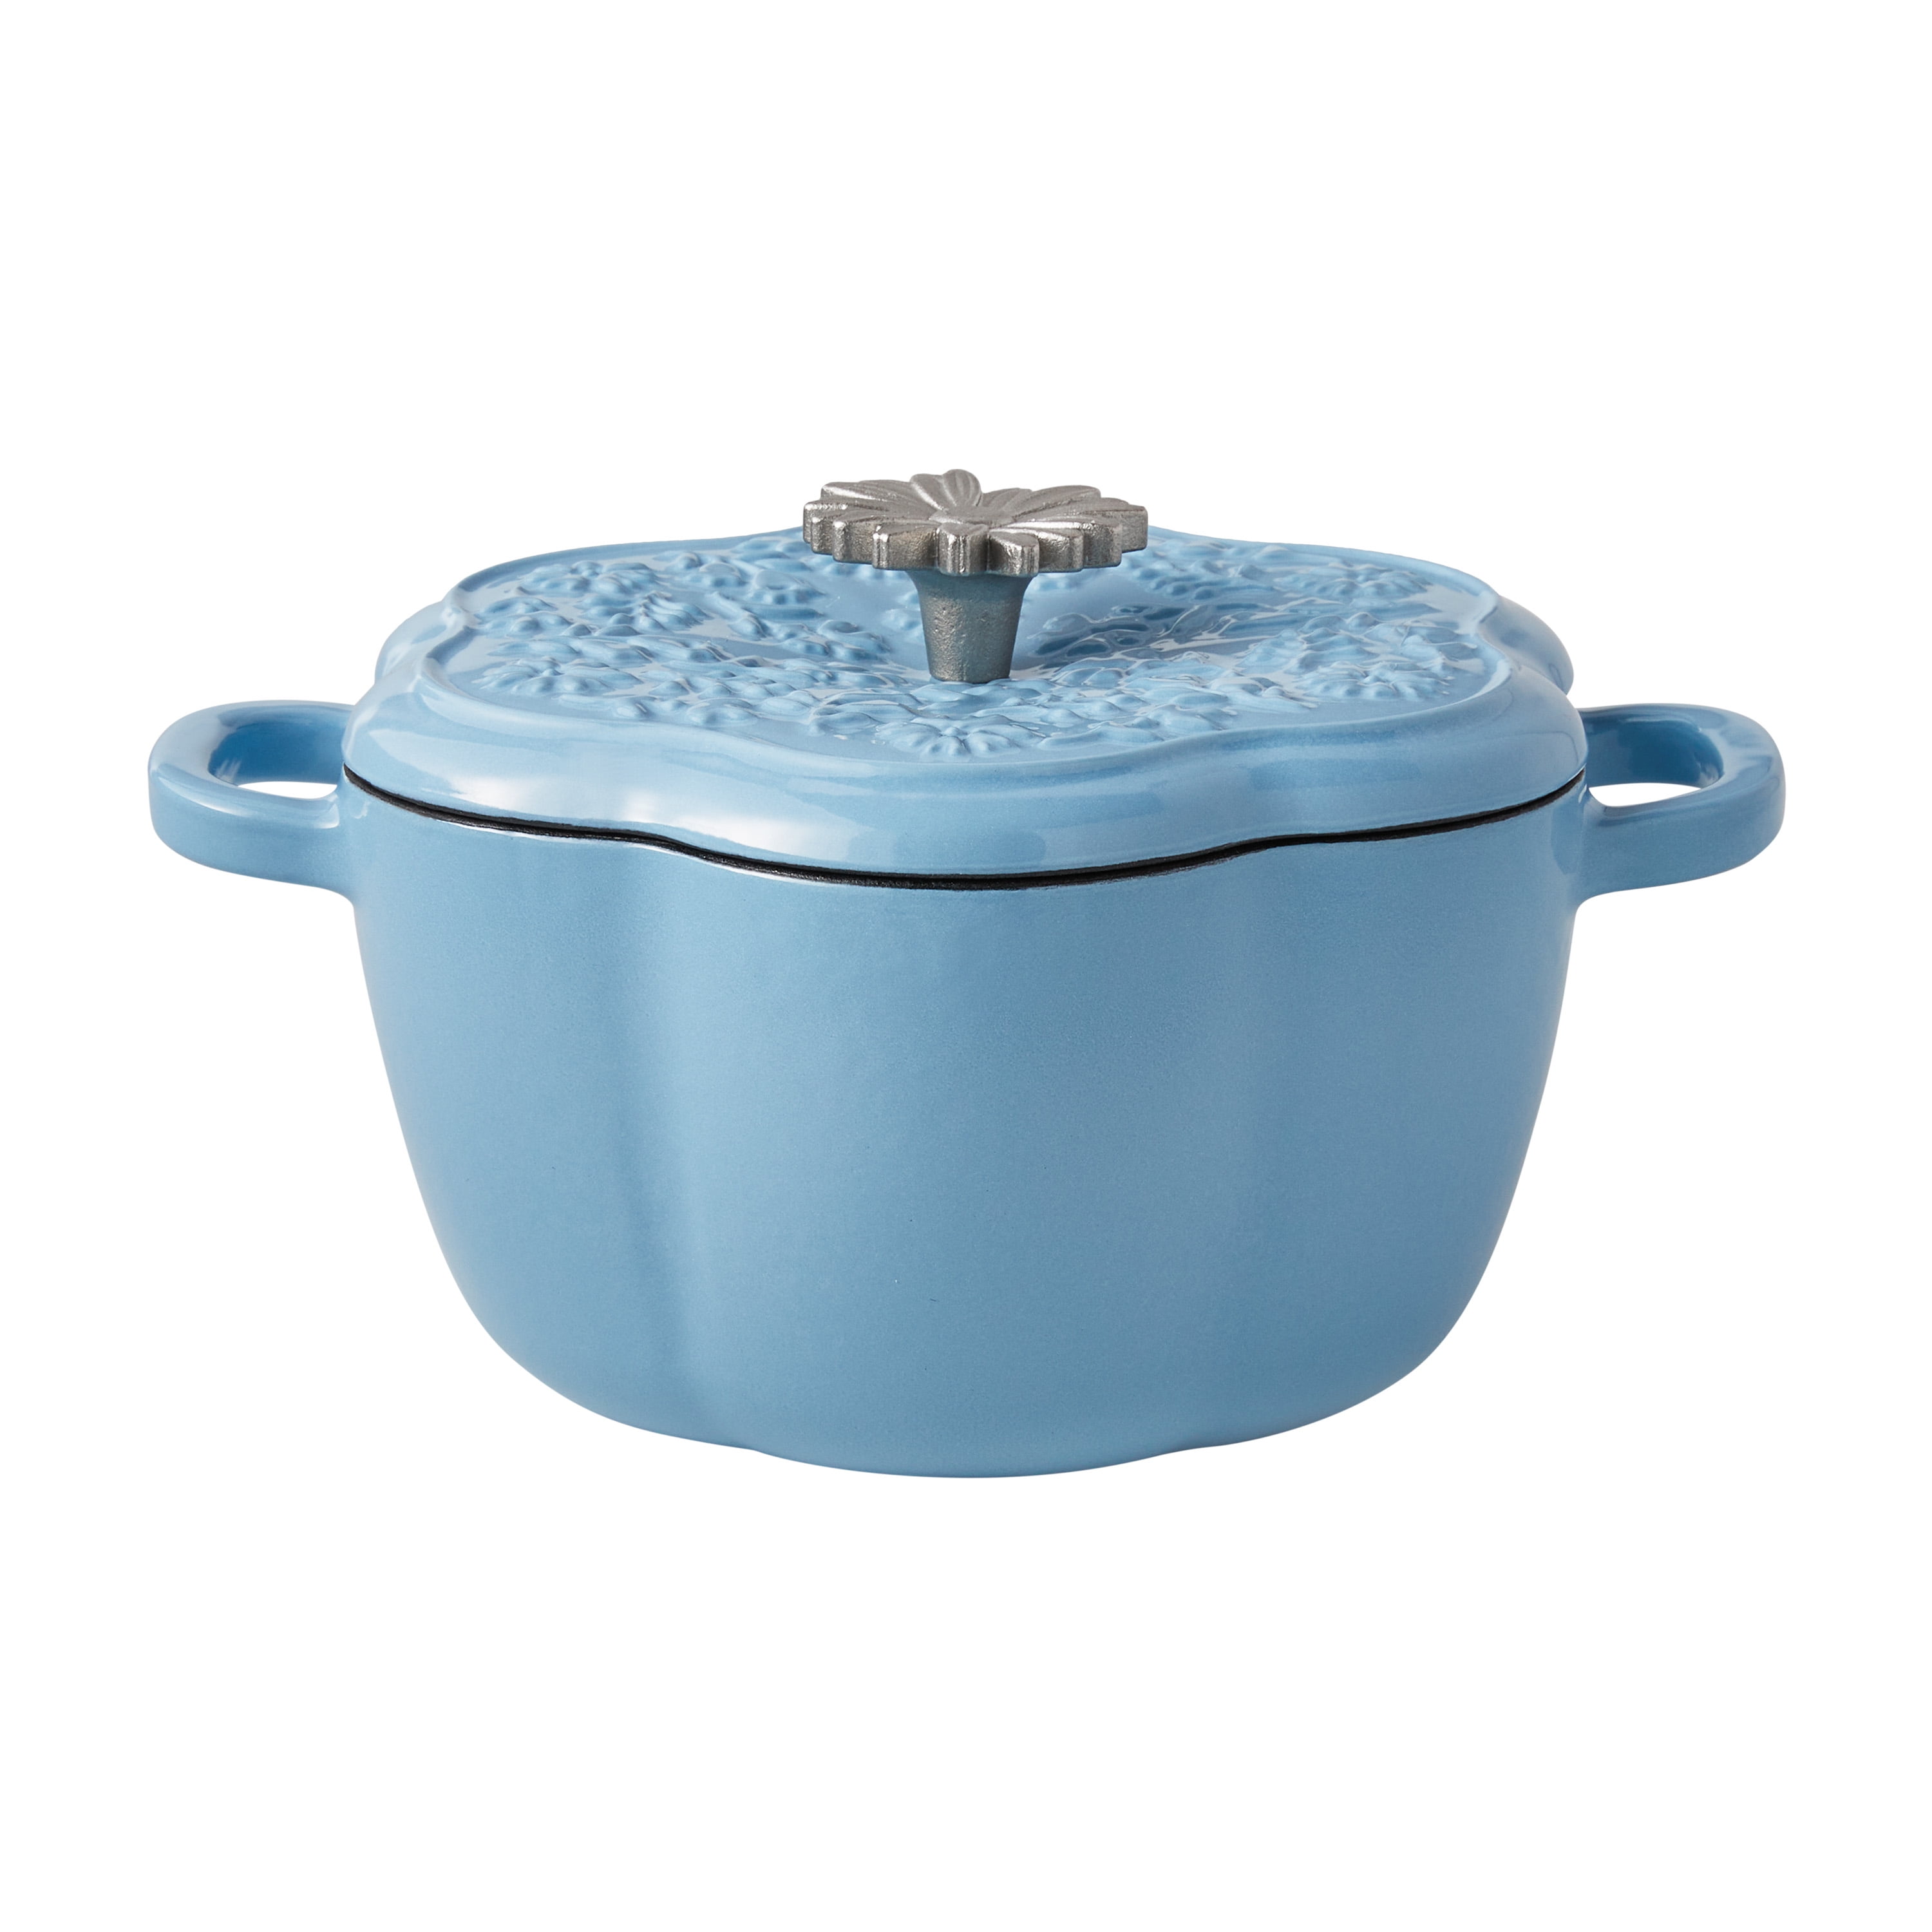 The Pioneer Woman Floral Enamel on Cast Iron 2-Quart Dutch Oven with Lid, Periwinkle, Size: 1 Piece